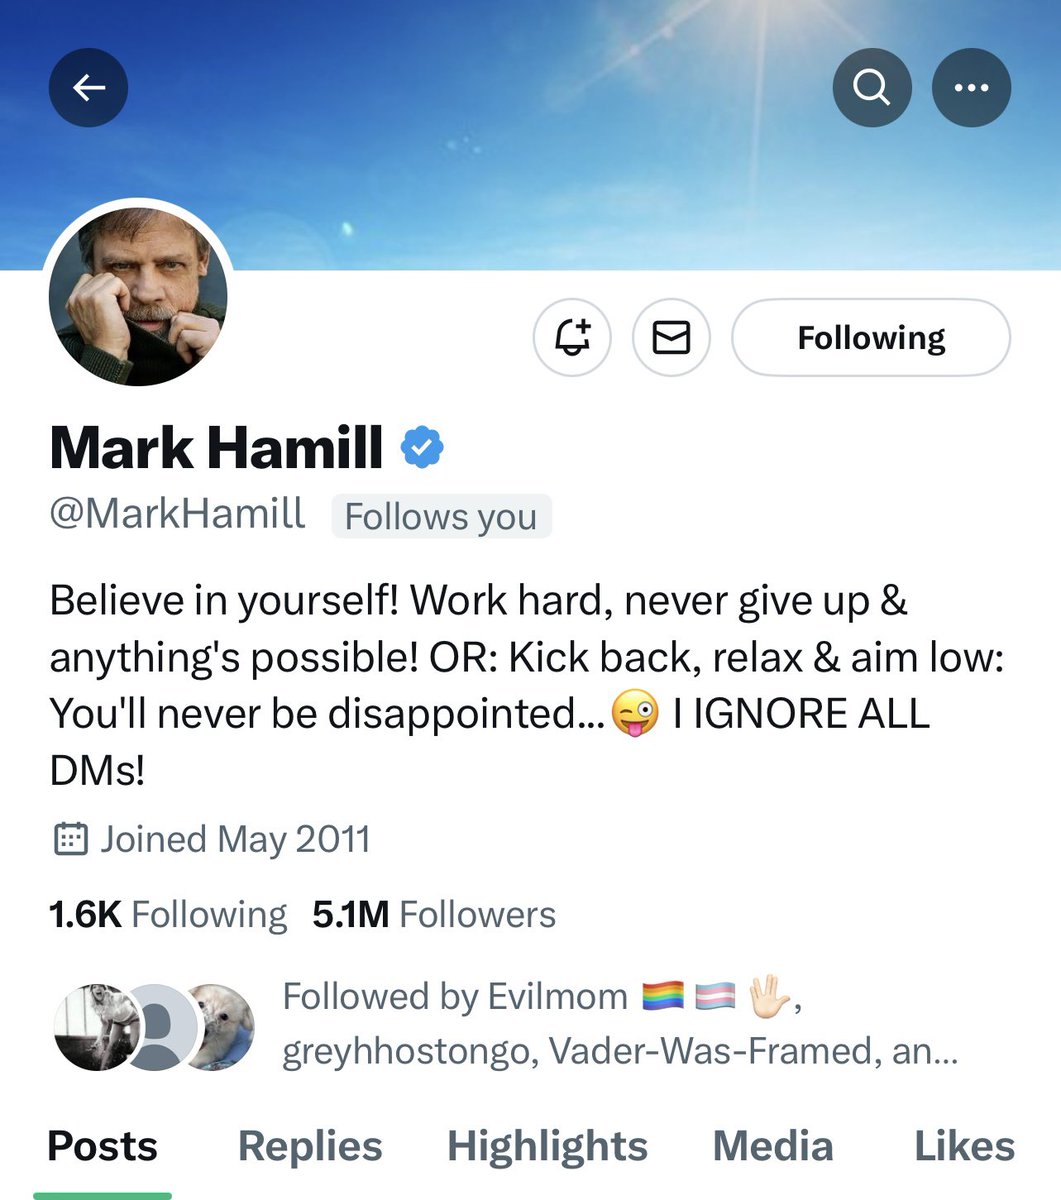 OMG!!! OMG!! OMG!! @MarkHamill is following me!!! On my star wars obsessed son’s 10th Birthday!!! I just showed him!!! He’s ecstatic. Thank you Mark Hamill, you just made his day!!!!!!! 🥳💙🥰😊🎁 #MayTheForceBeWithYou